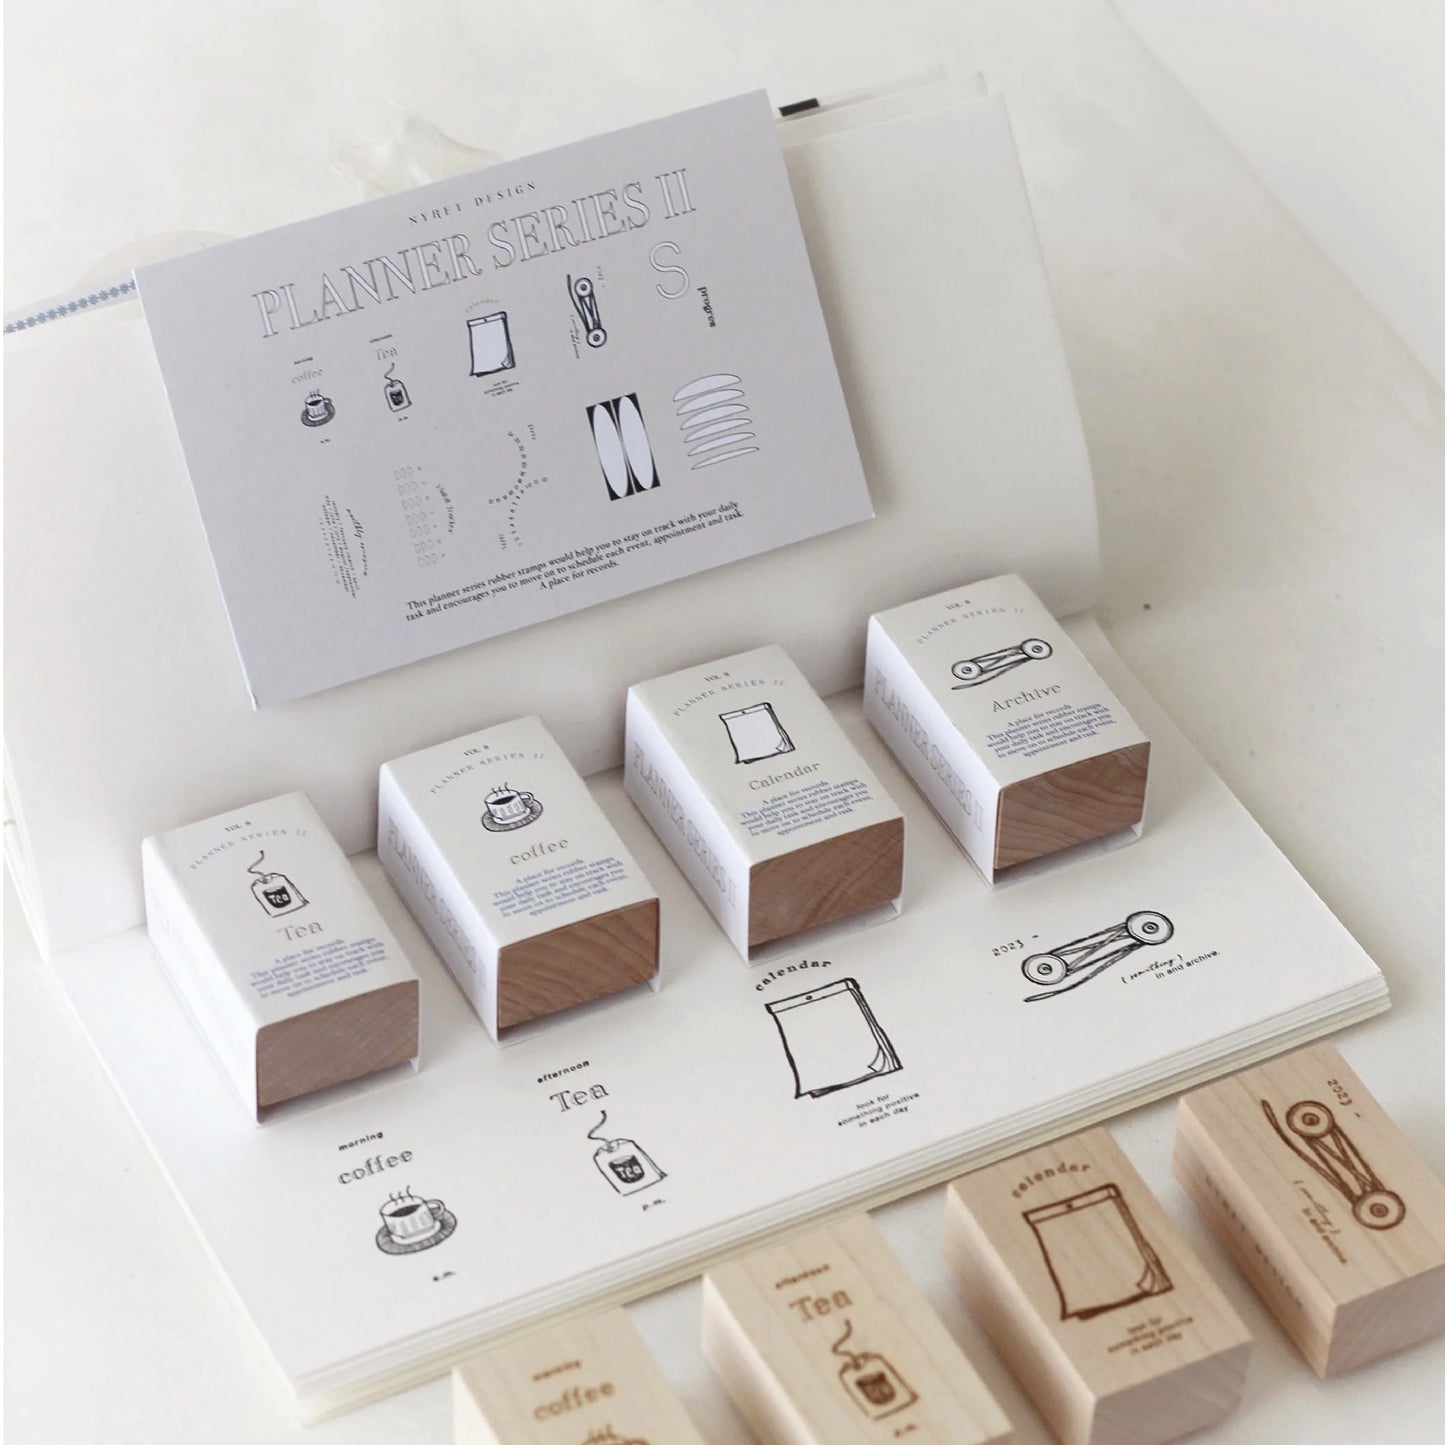 NYRET Design Vo.8 Planner Series II Rubber Stamps